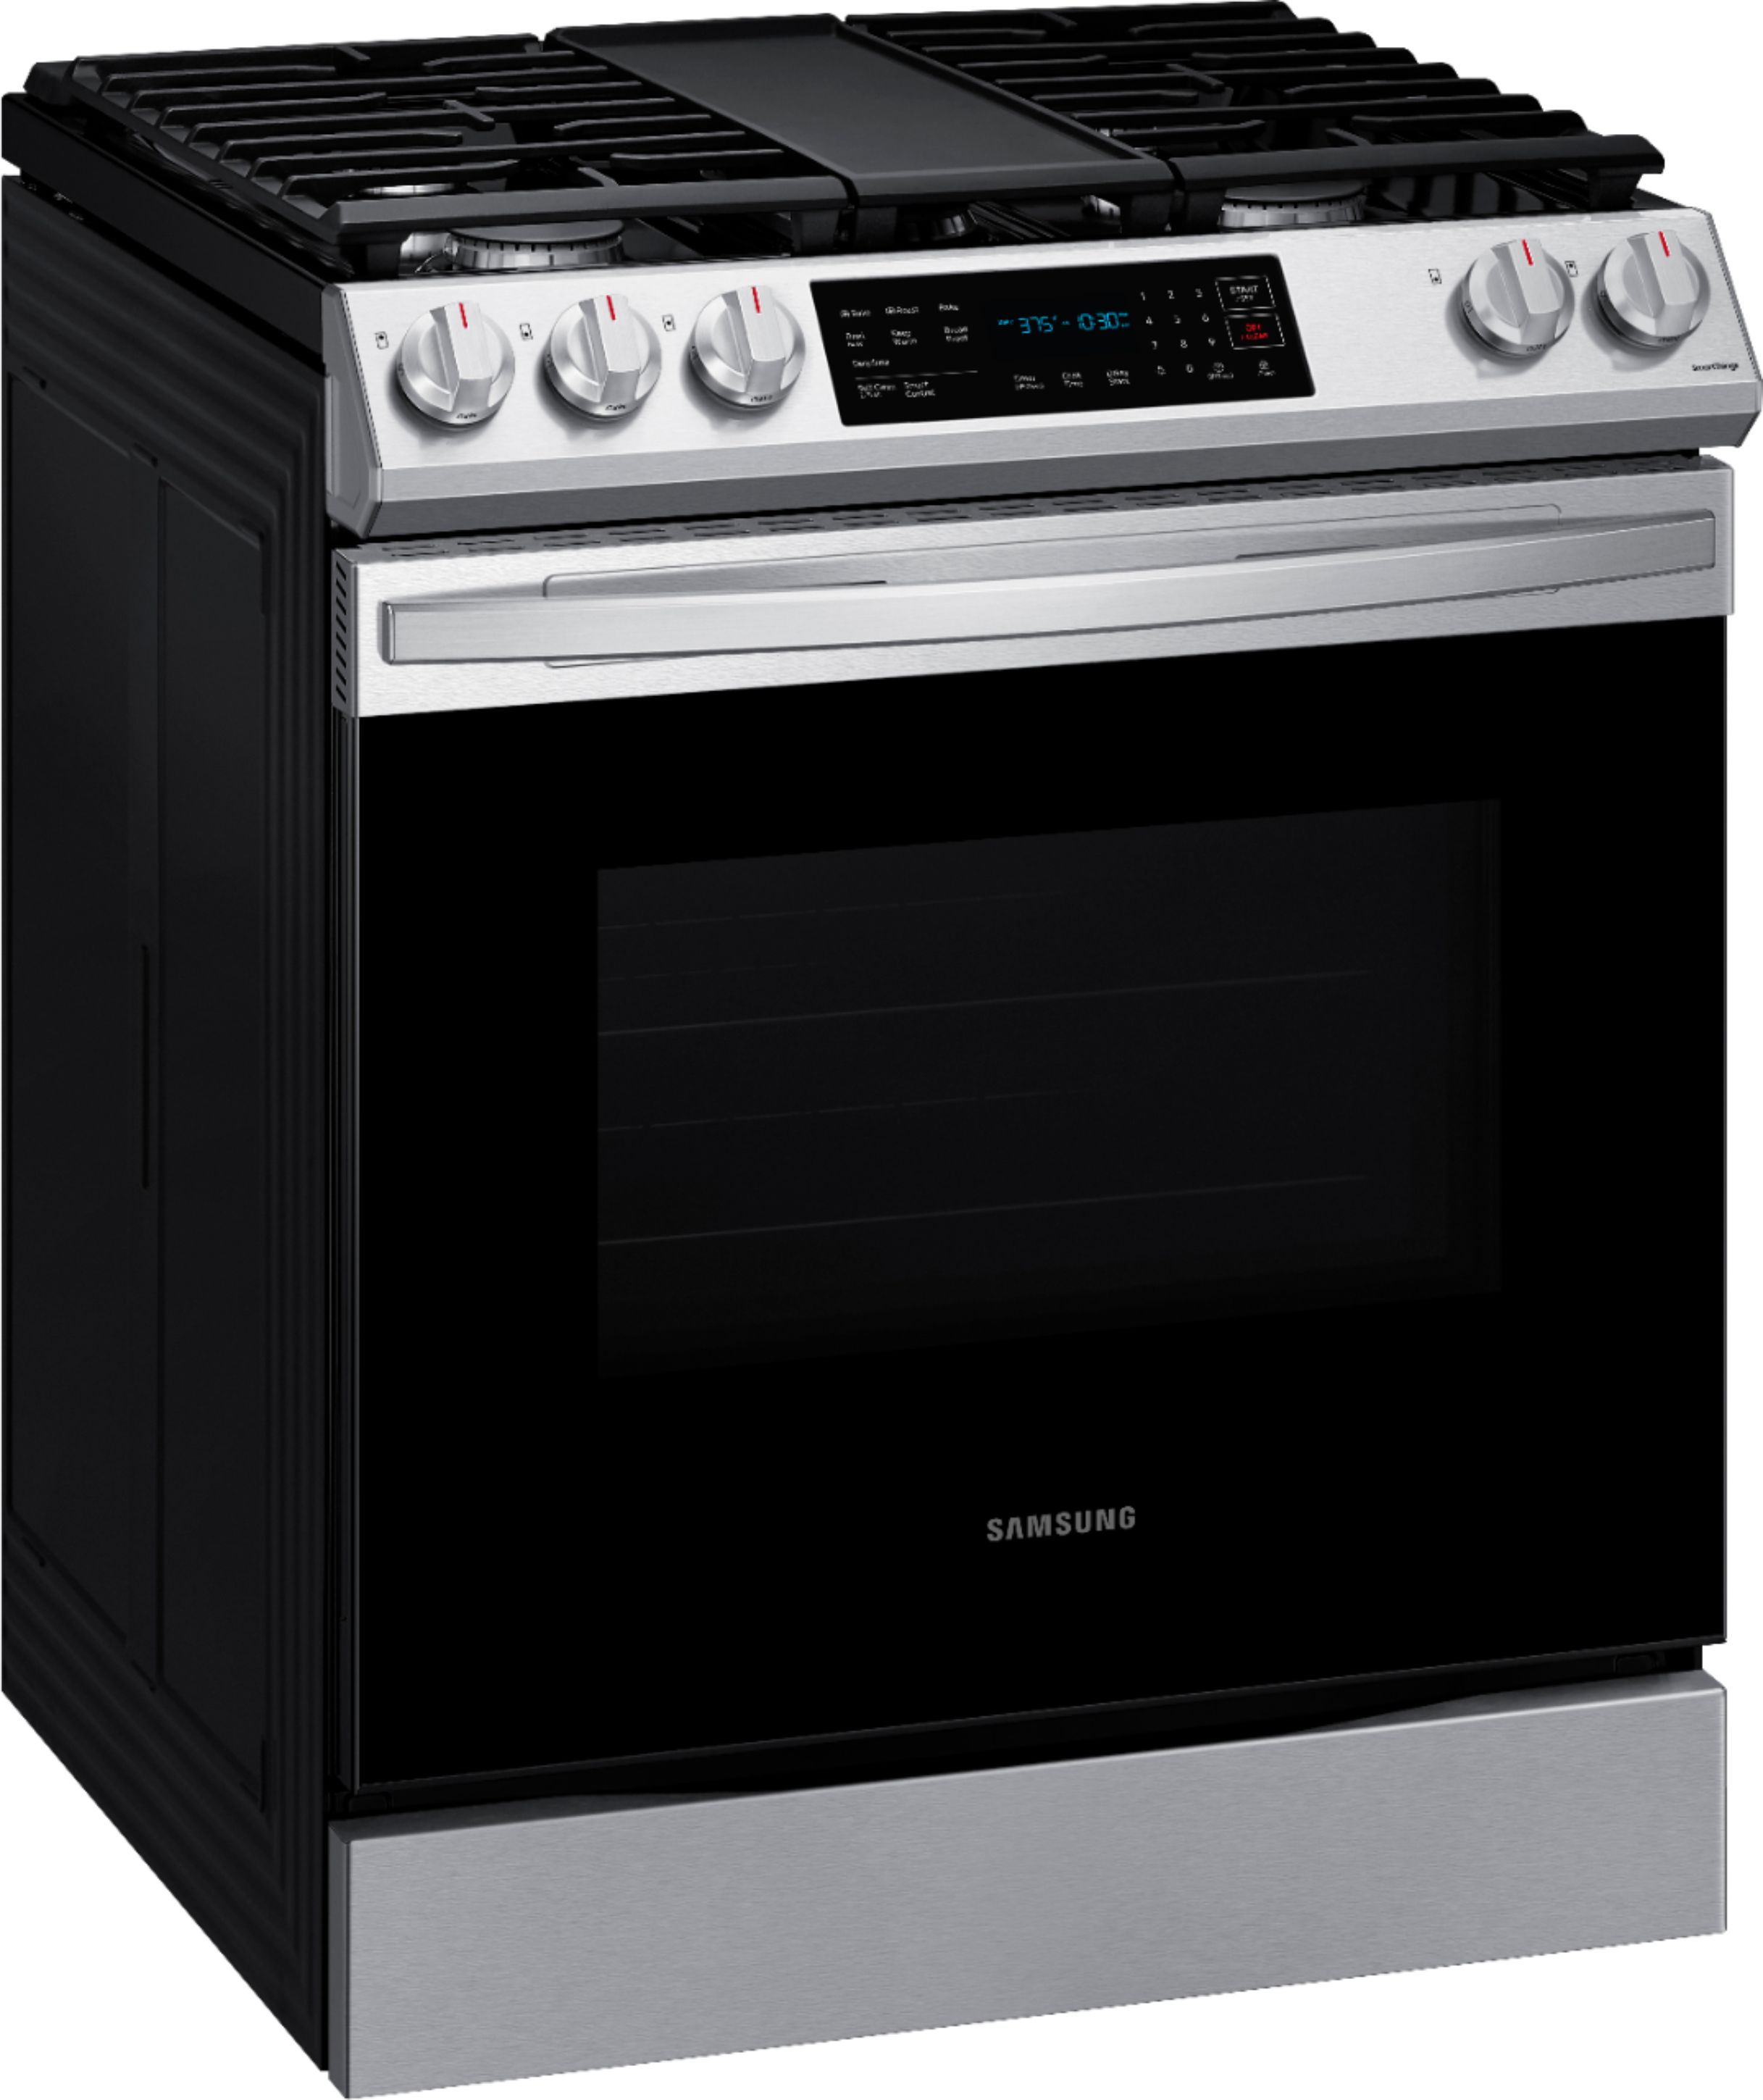 Angle View: Samsung - 6.0 cu. ft. Front Control Slide-In Gas Range with Convection & Wi-Fi, Fingerprint Resistant - Stainless steel